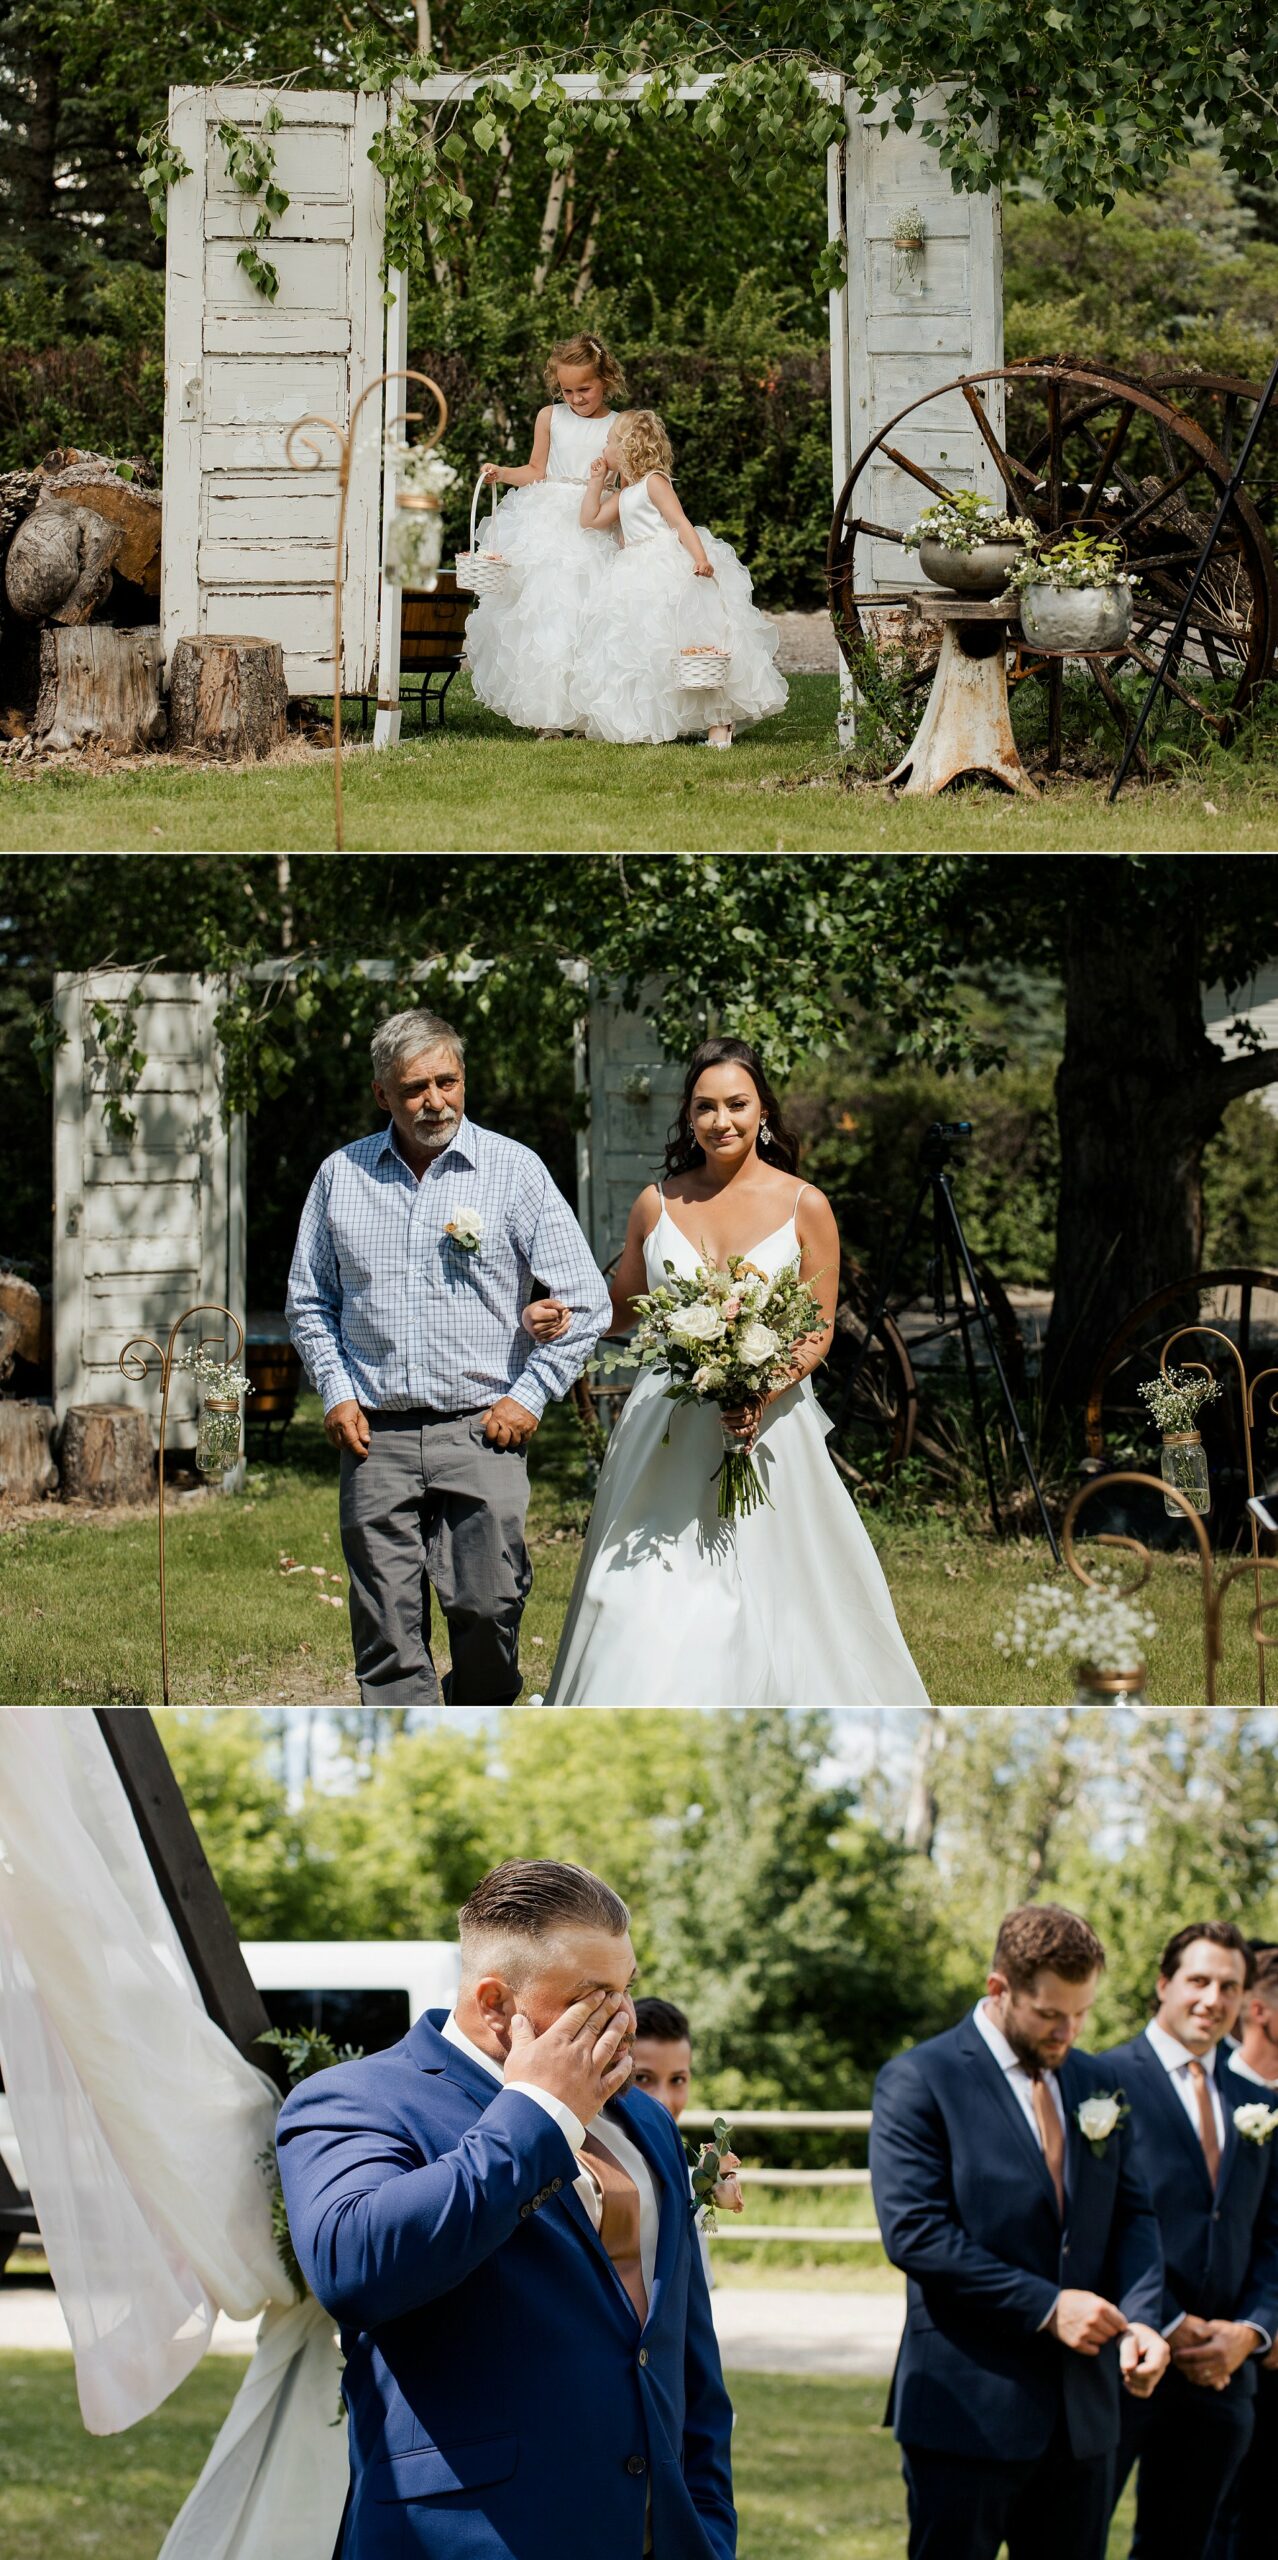 The bride walks down the aisle to her emotional groom in an outdoor wedding ceremony on a very sunny hot day.